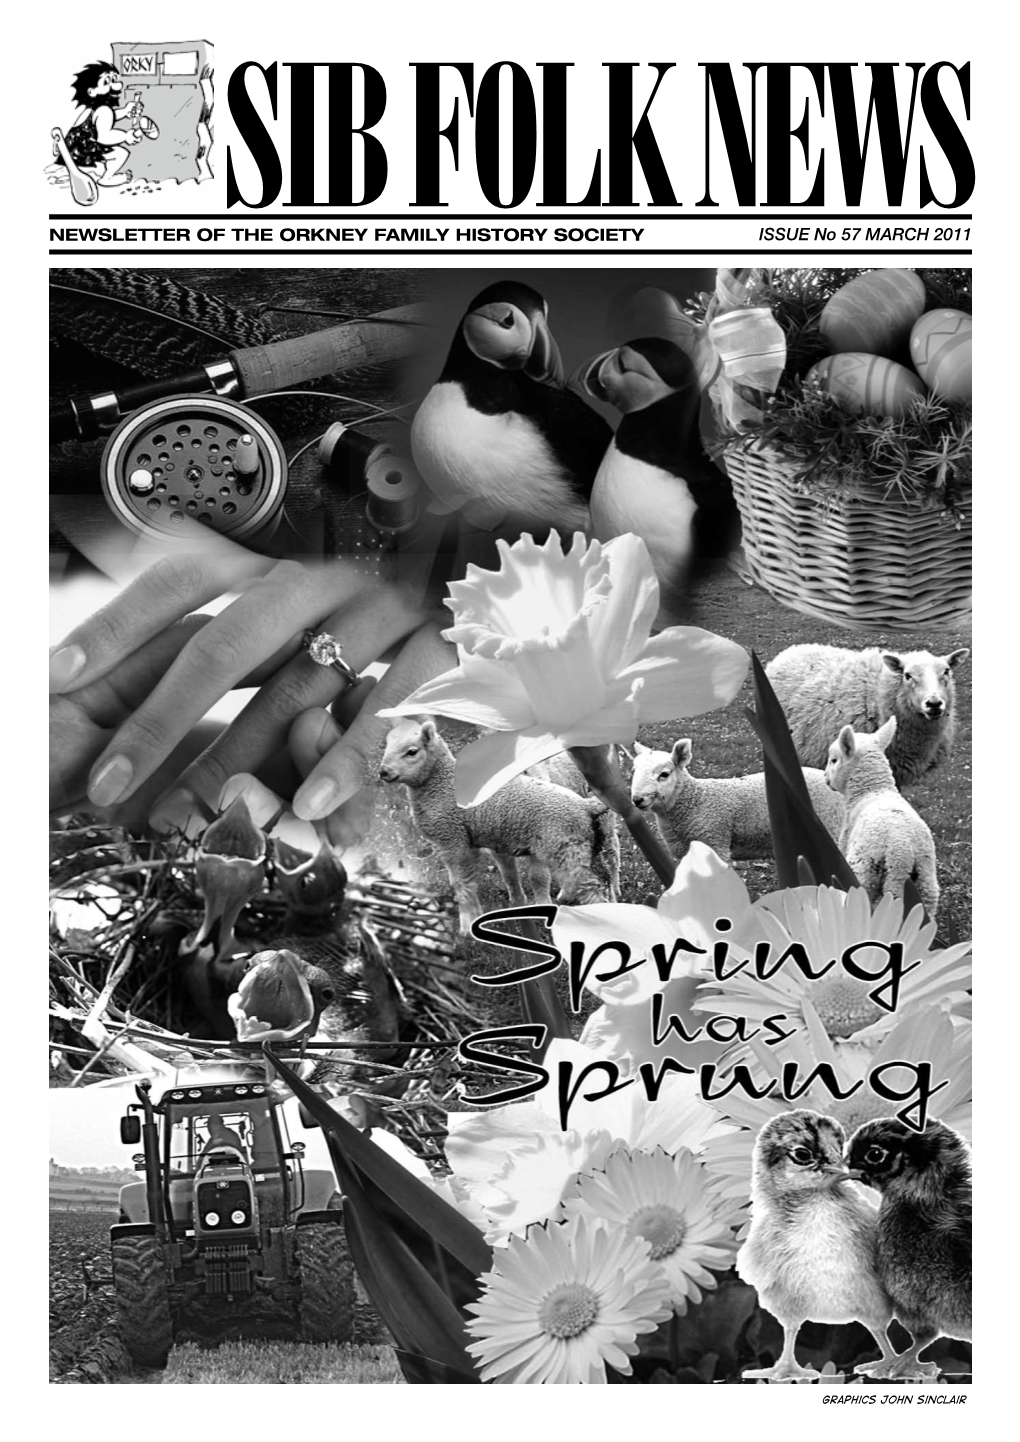 NEWSLETTER of the ORKNEY FAMILY HISTORY SOCIETY Issue No 57 March 2011